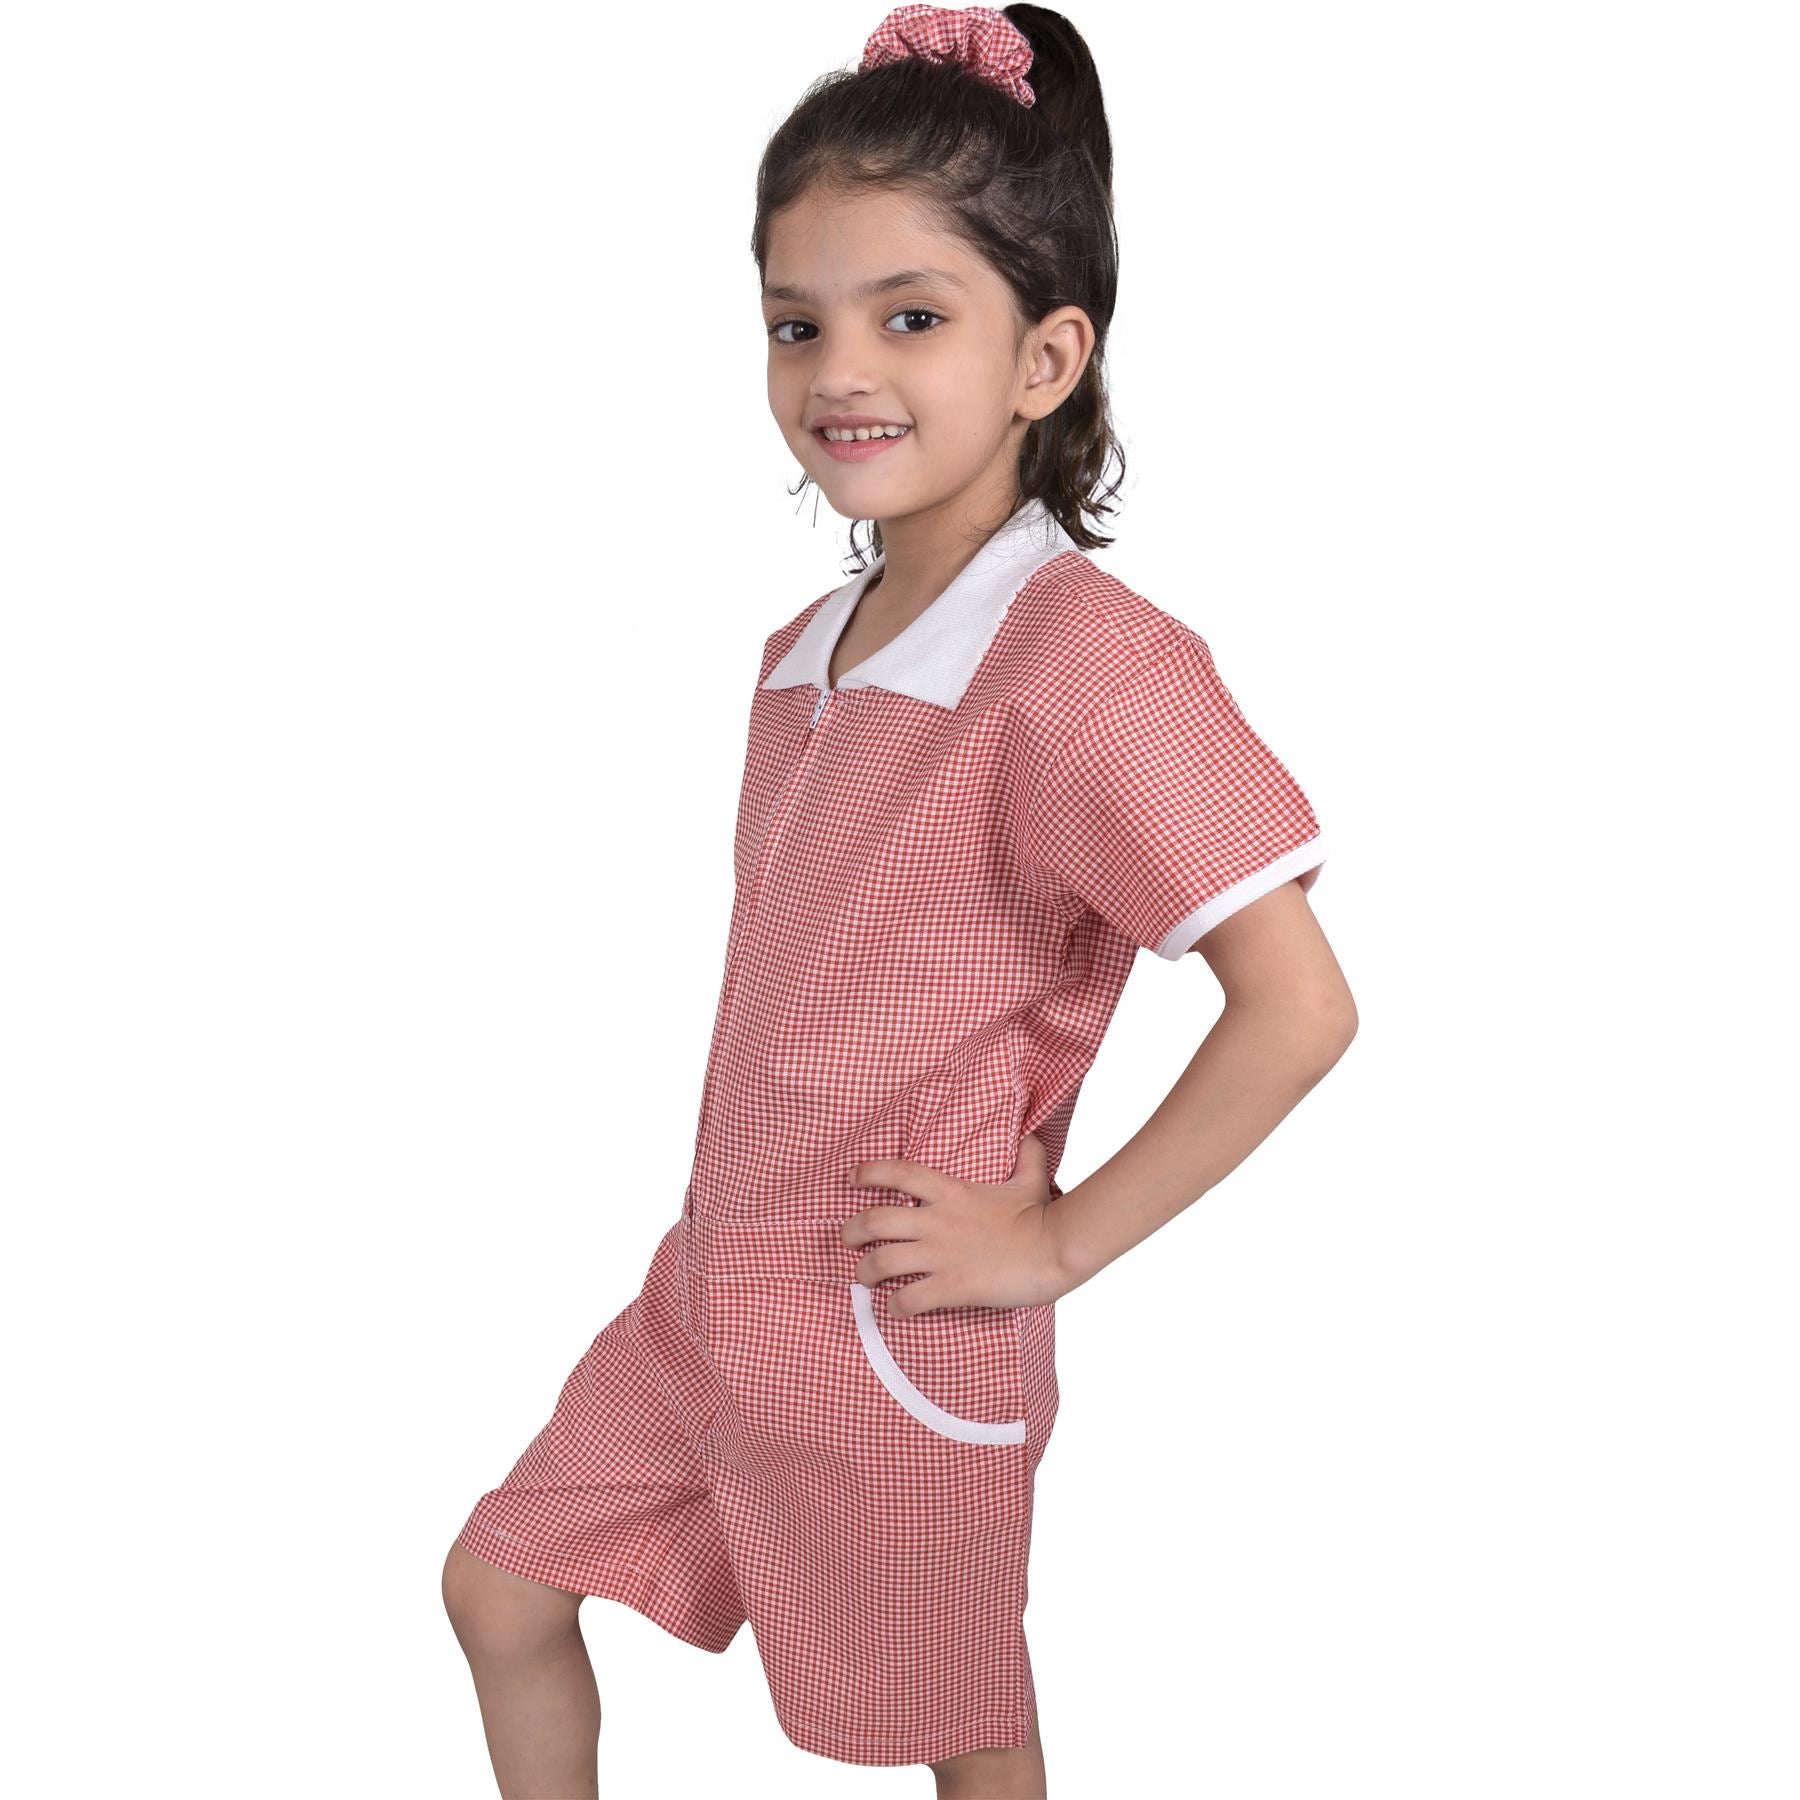 Kids Girls Gingham School 2 Pack Check Summer Playsuit With Matching Scrunchies